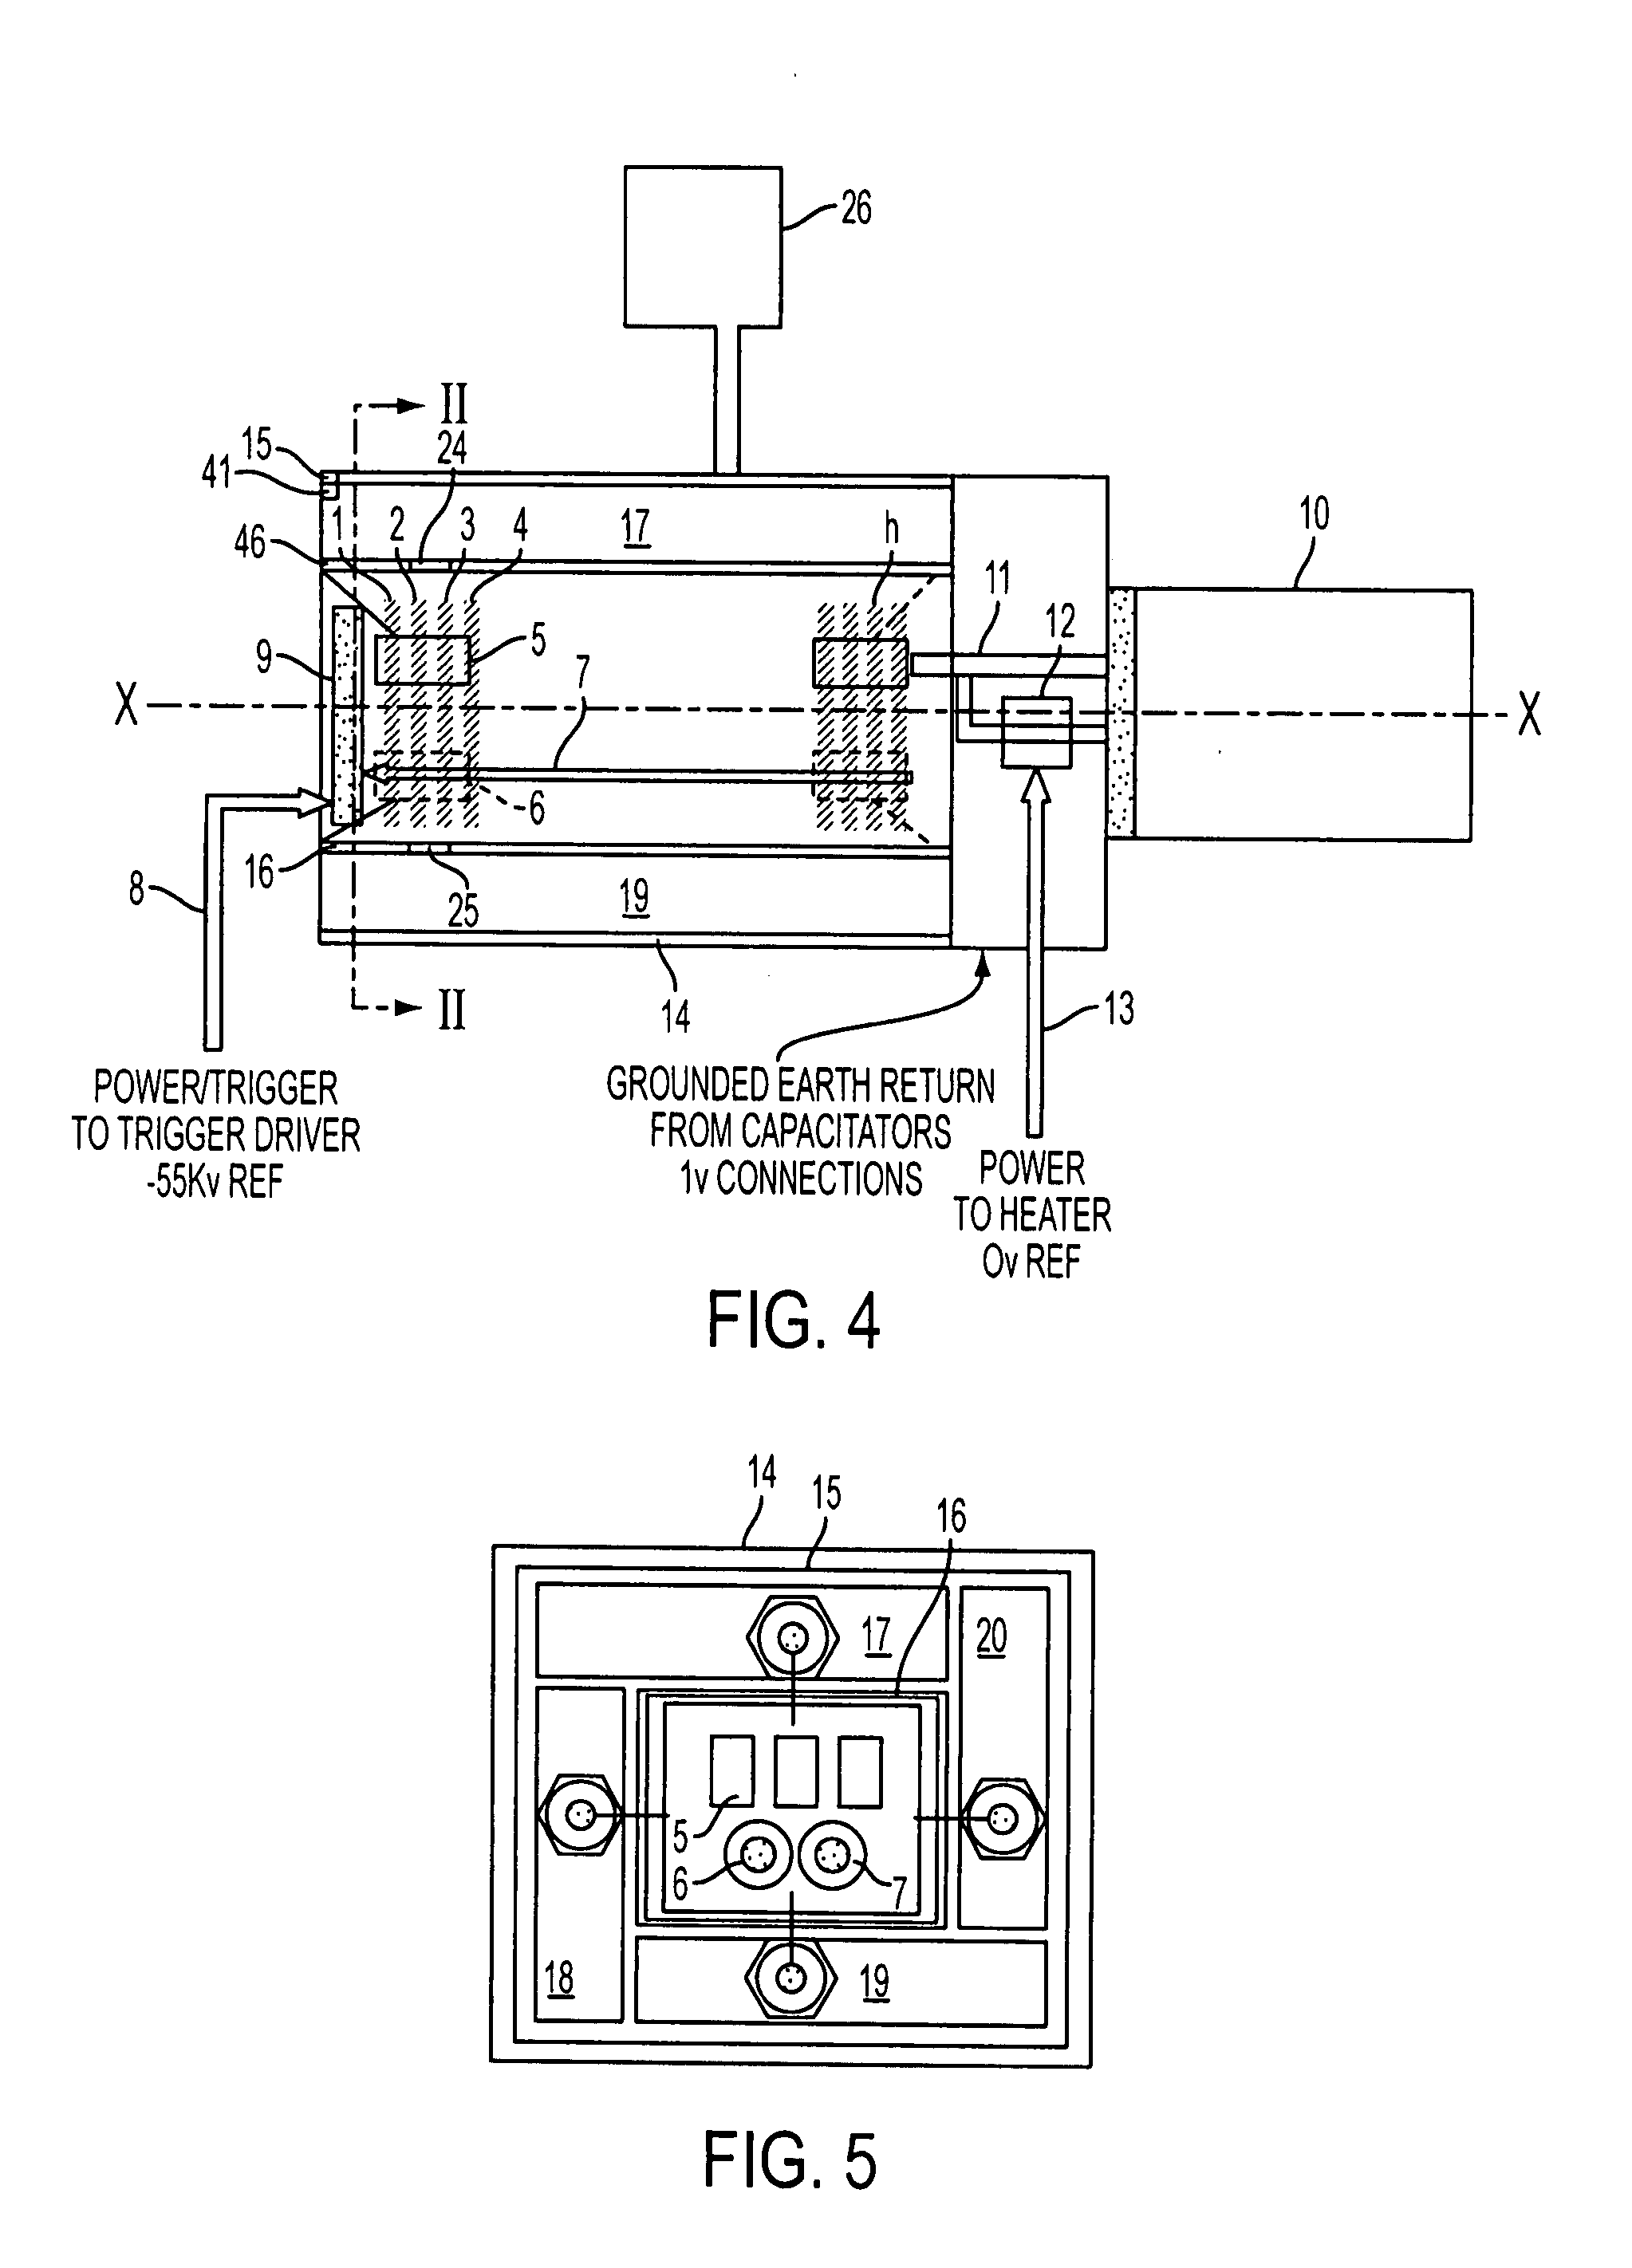 High voltage switching apparatus